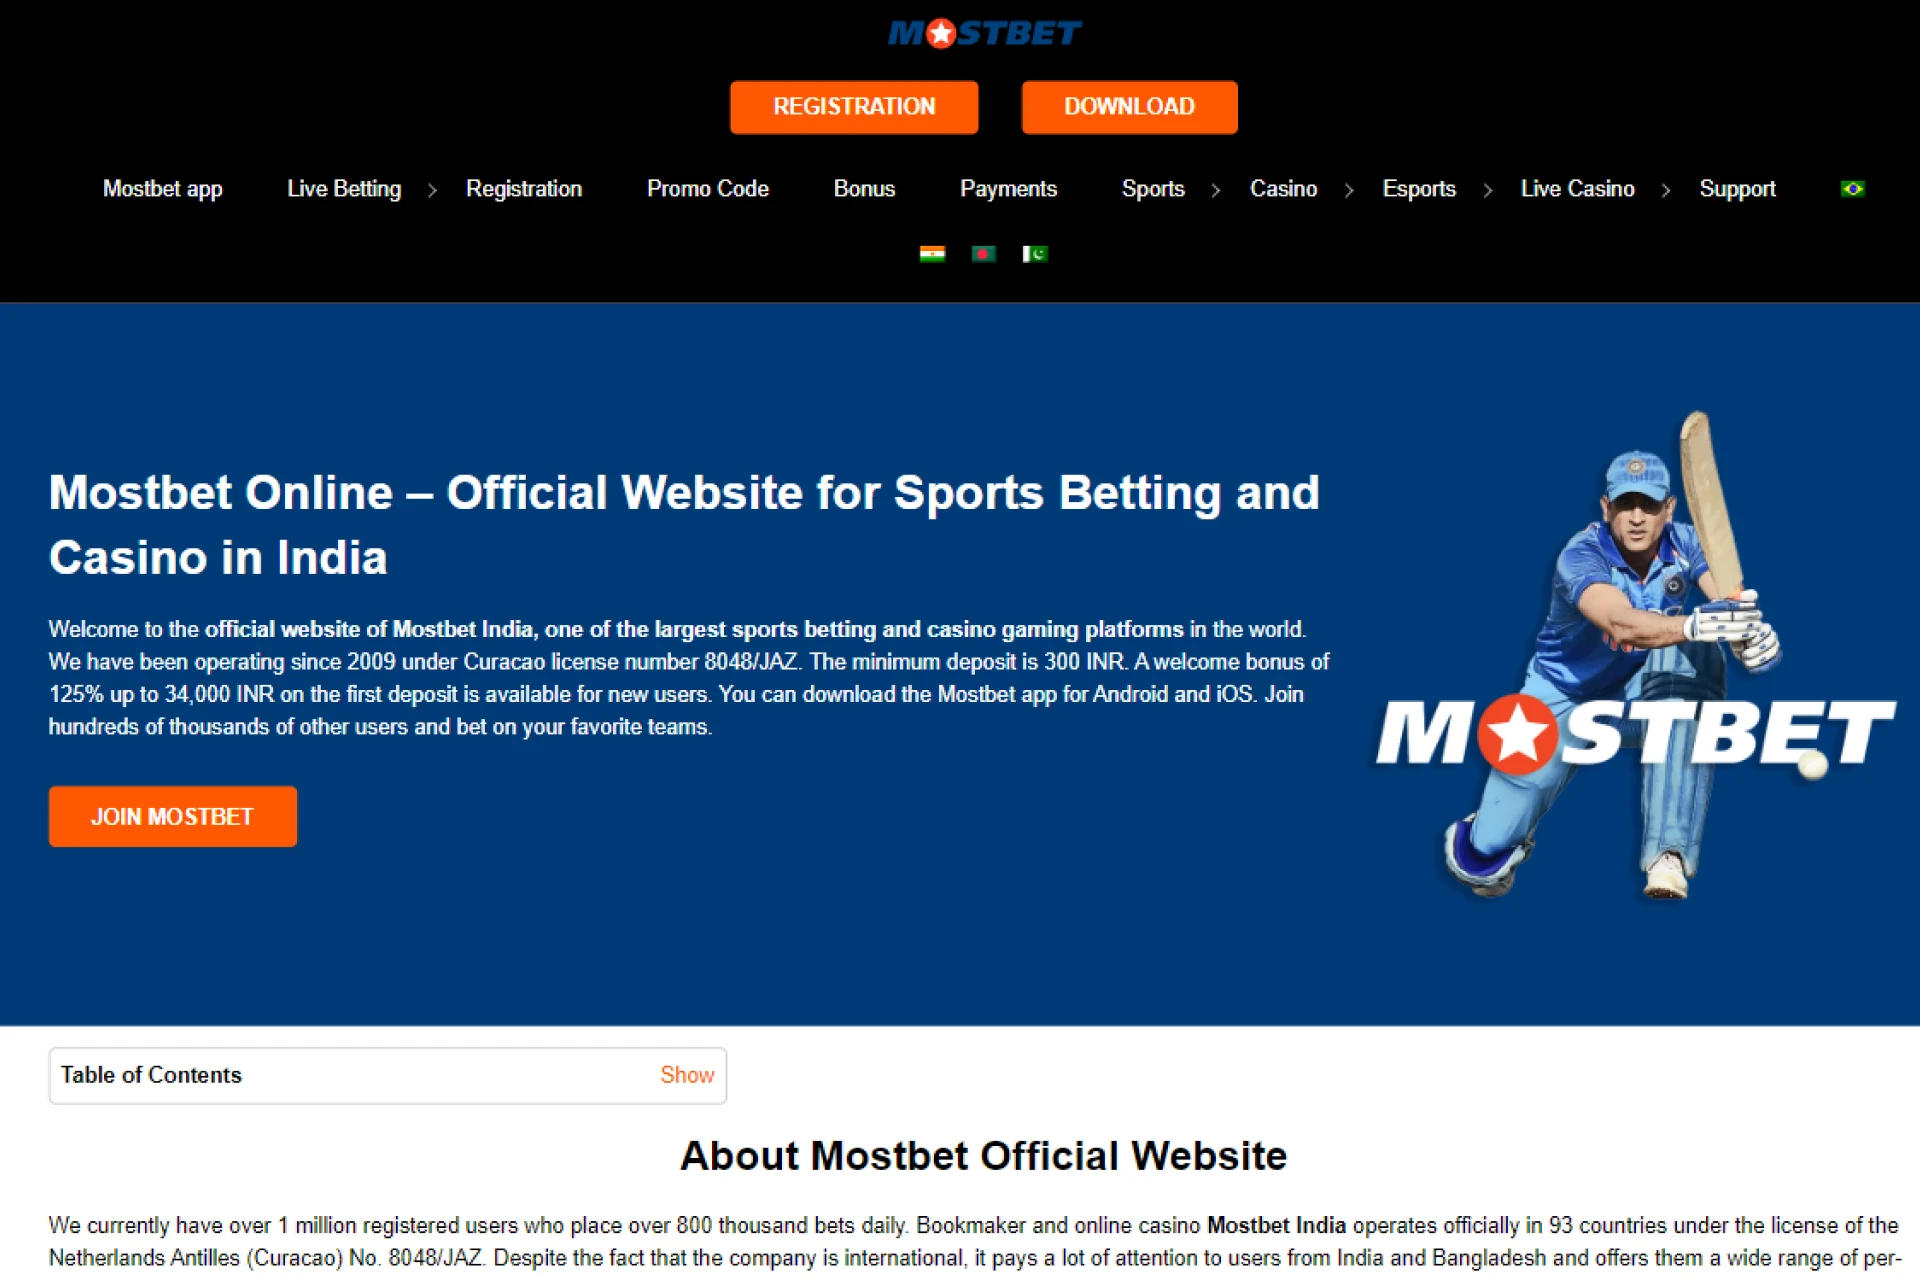 Launch the official Mostbet website to register your account.